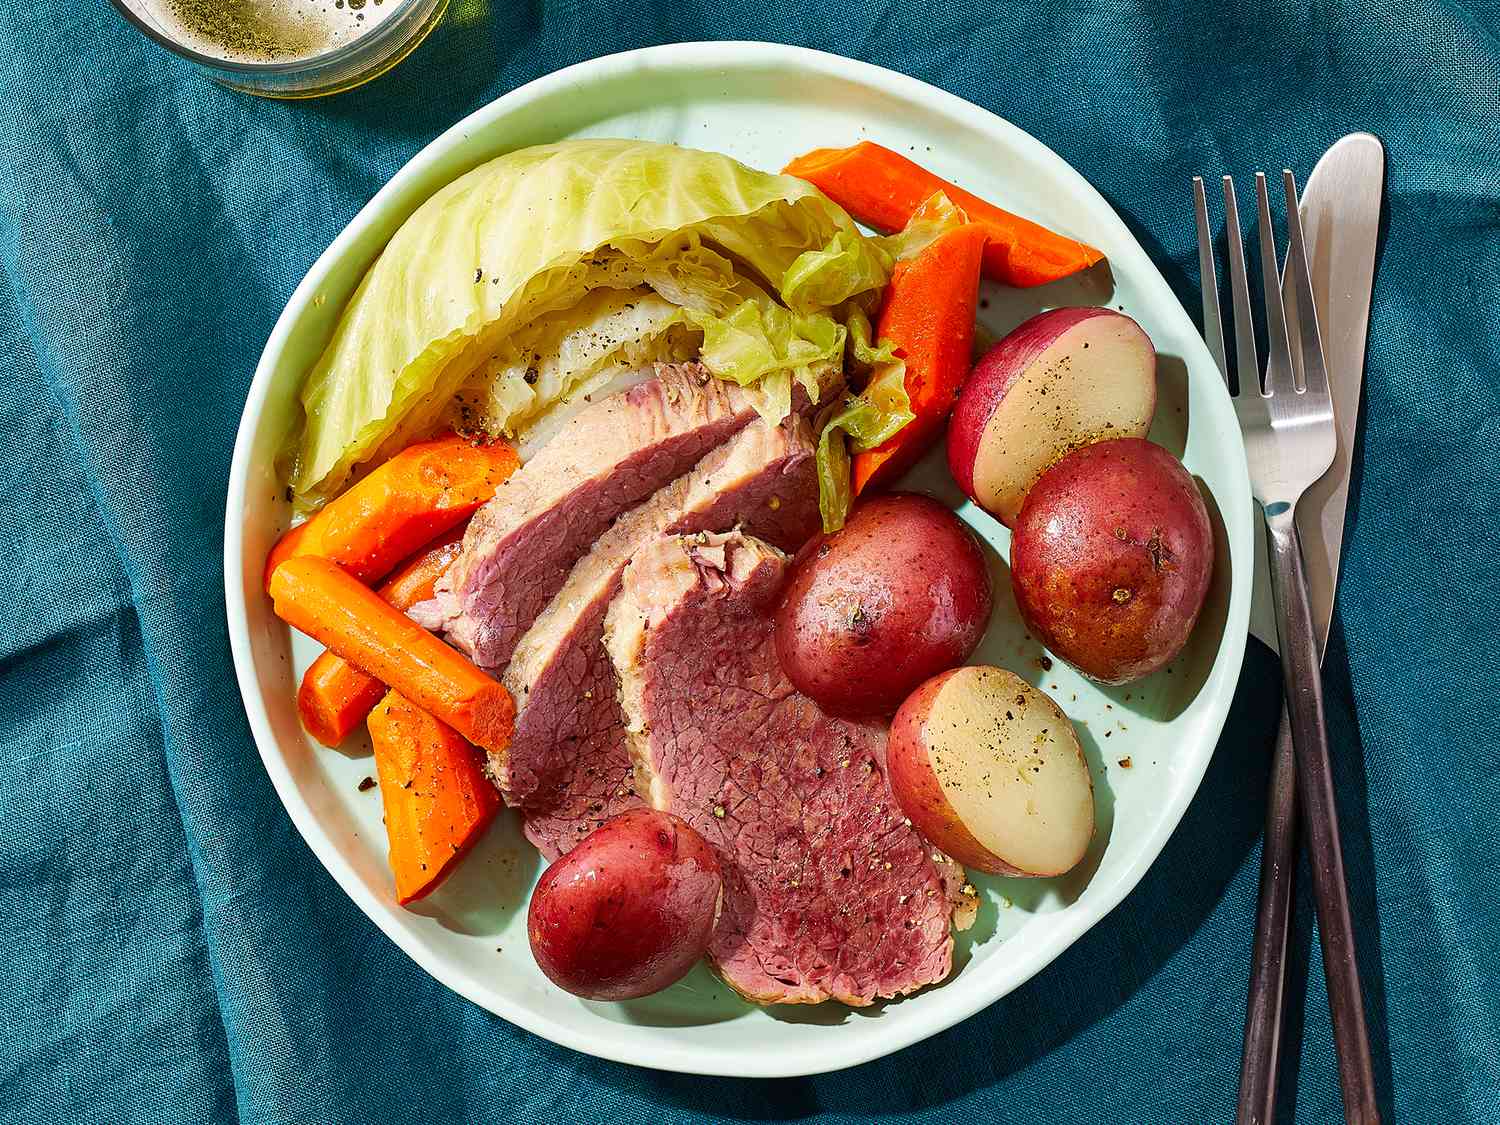 Overhead angle looking at a plate of Irish boiled dinner